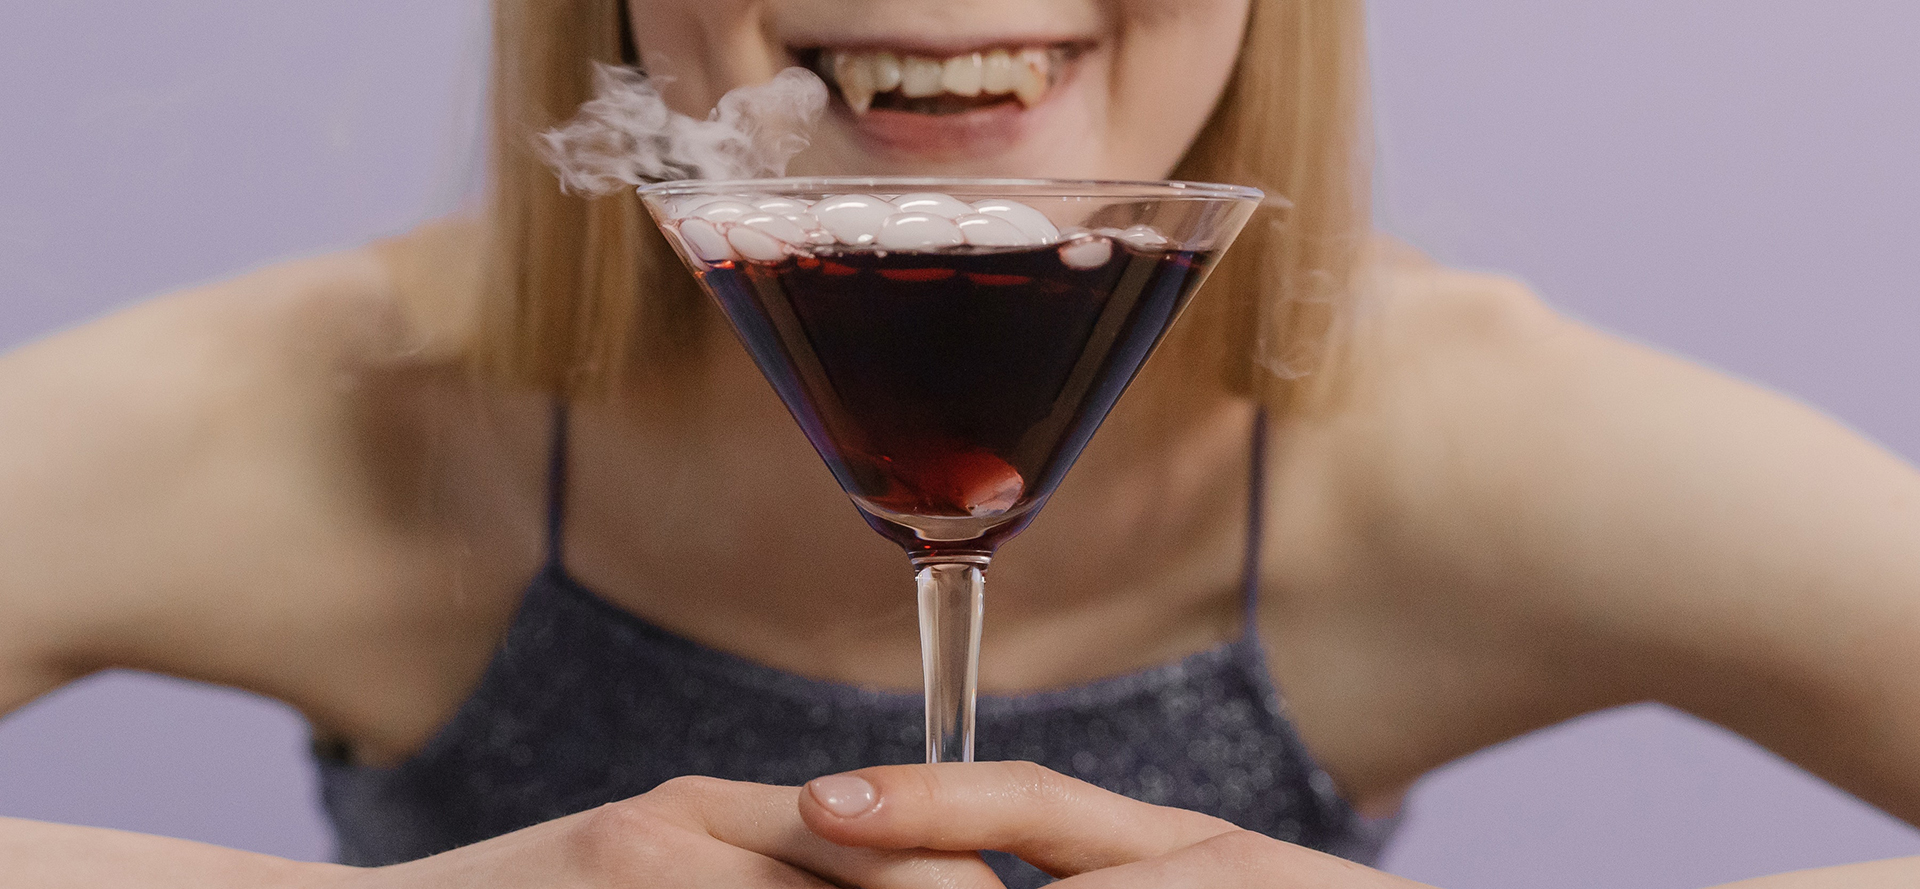 Vampire girl with a bloody cocktail.